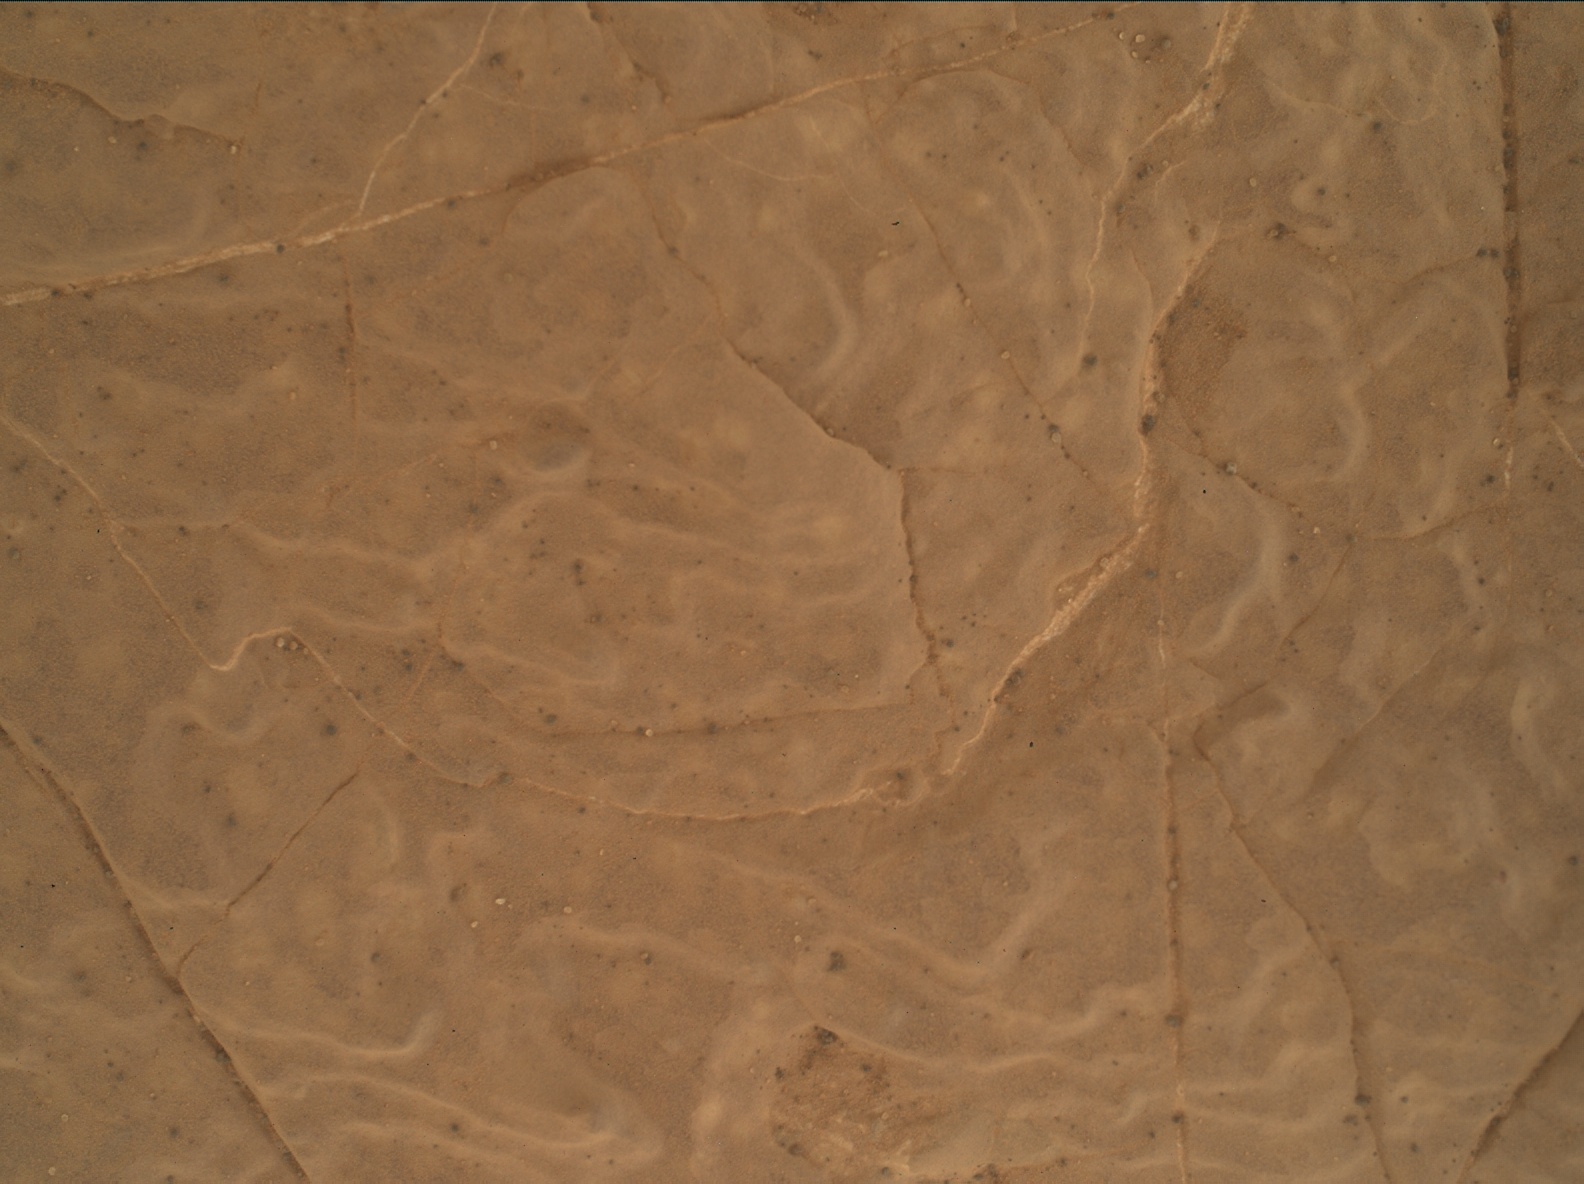 Nasa's Mars rover Curiosity acquired this image using its Mars Hand Lens Imager (MAHLI) on Sol 3040